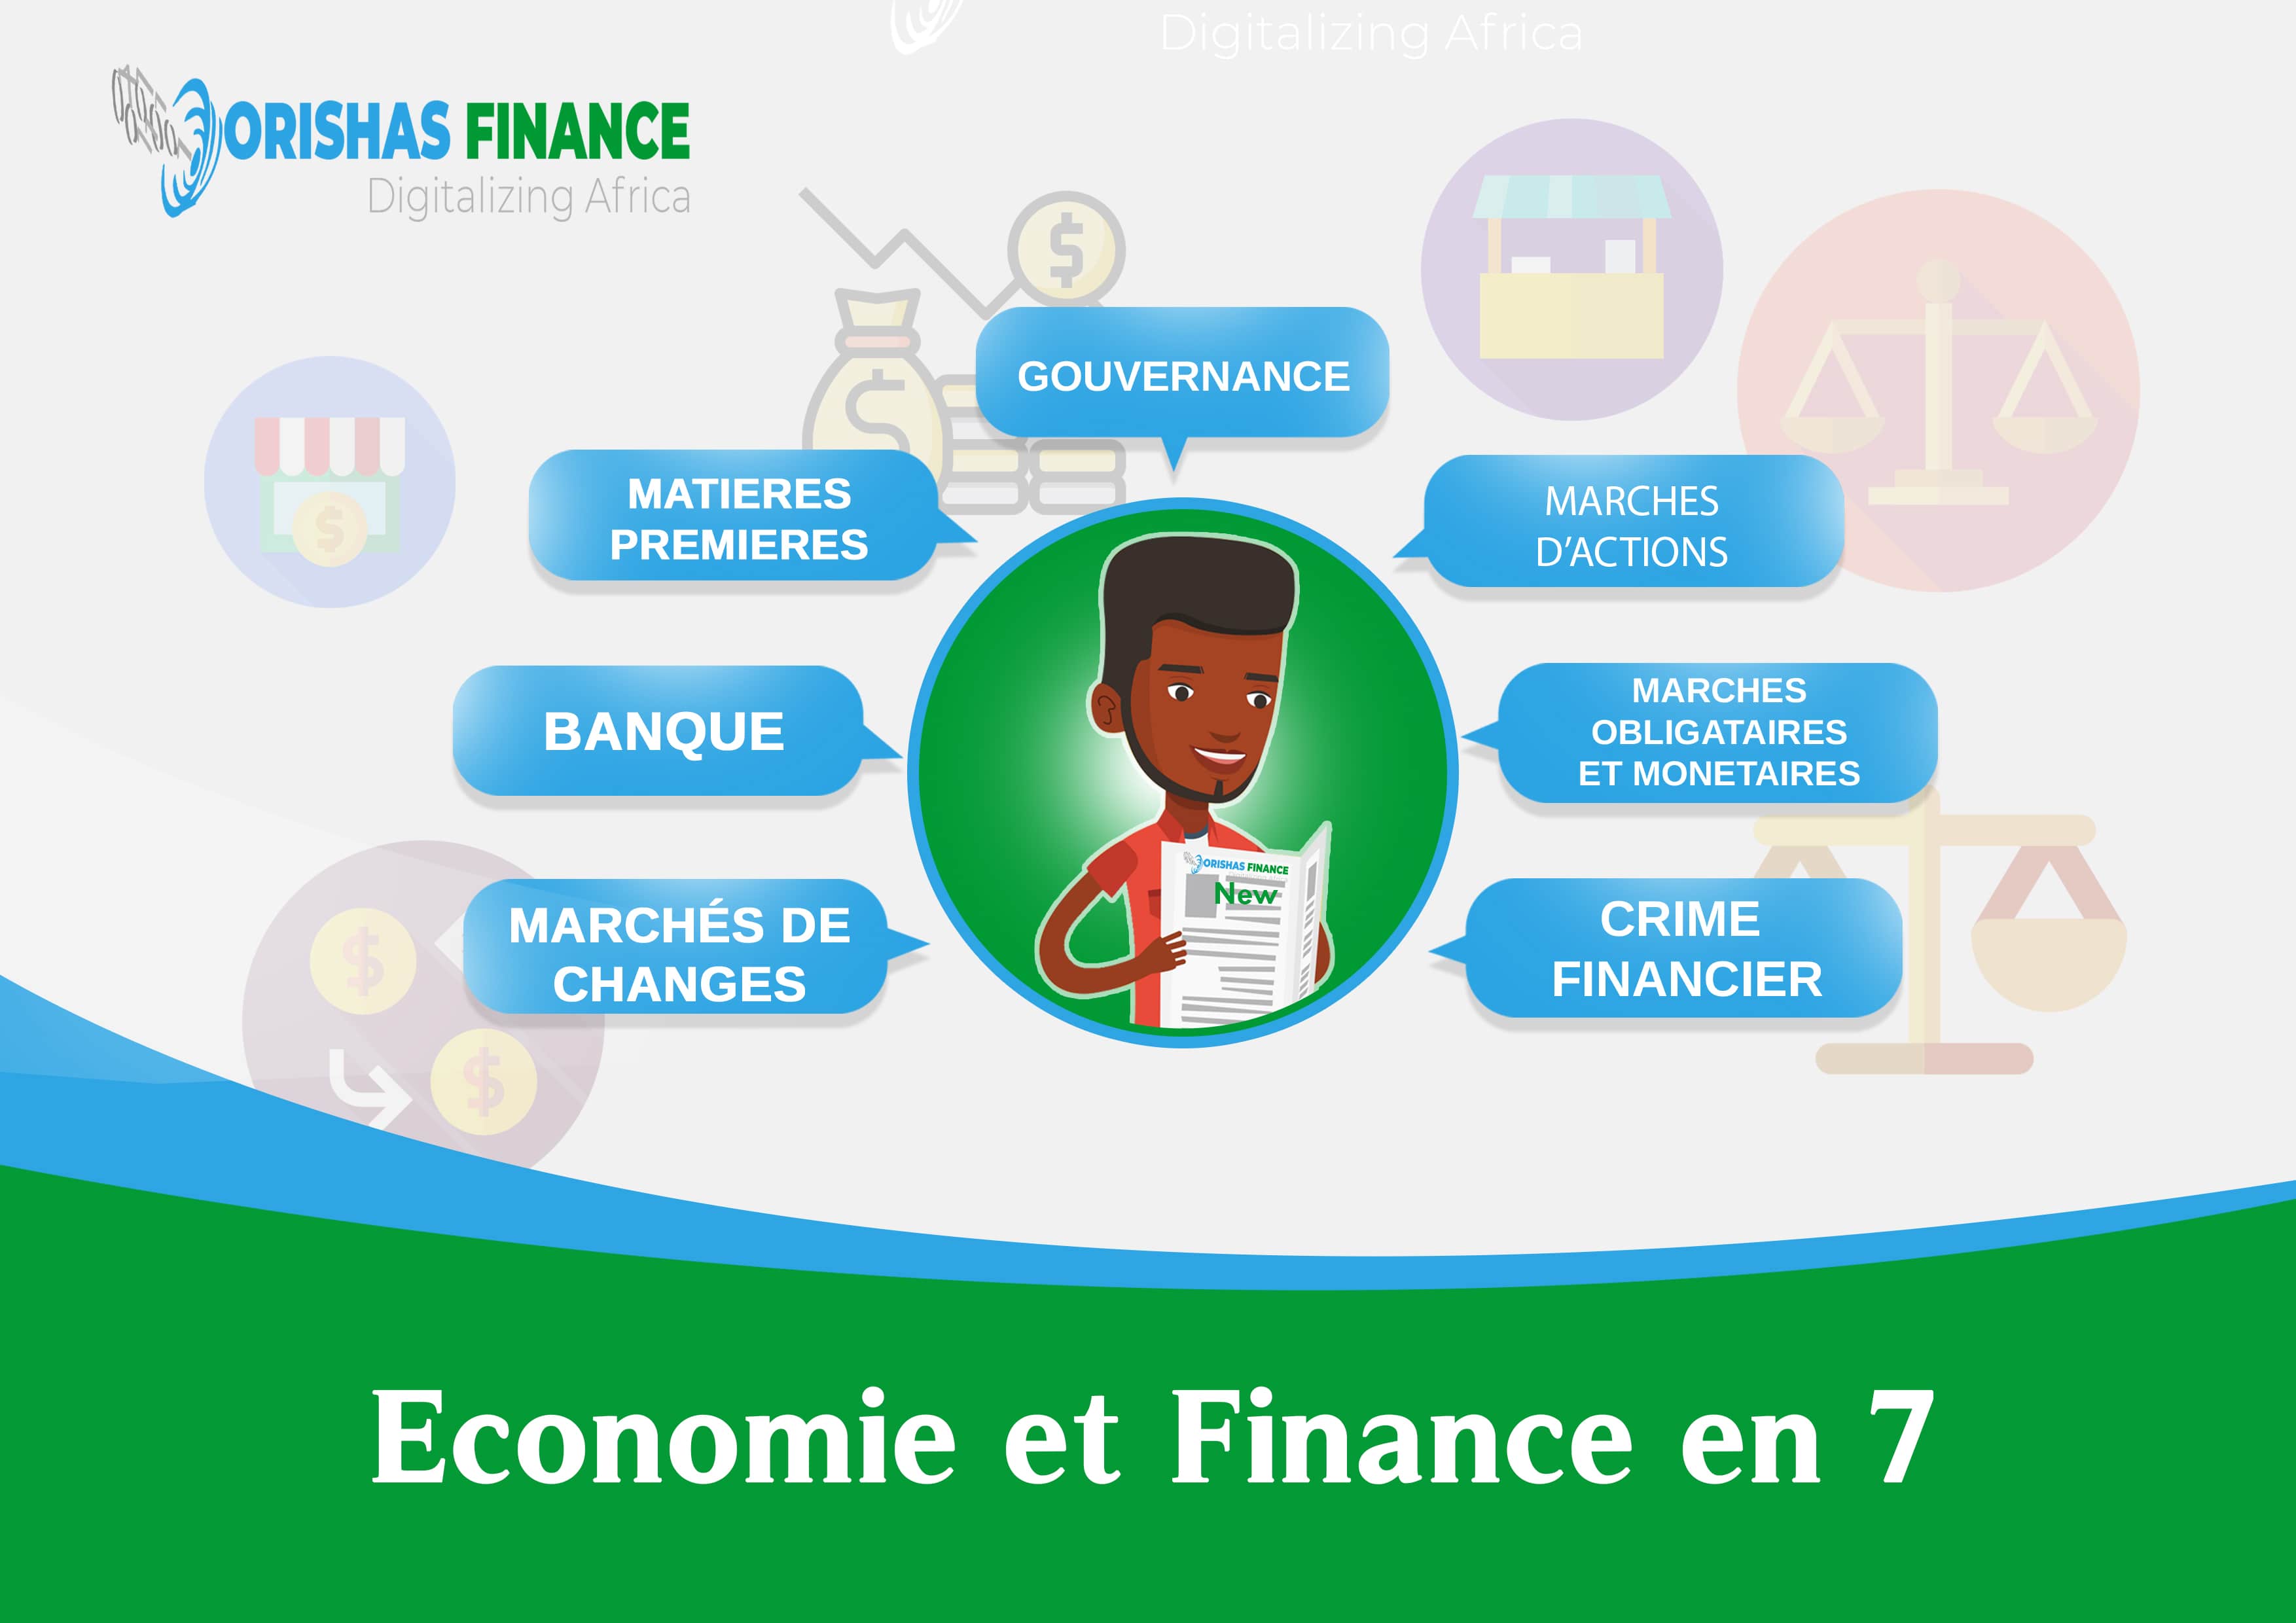  Economy and Finance in 7 from 03 to 07 May 2021 